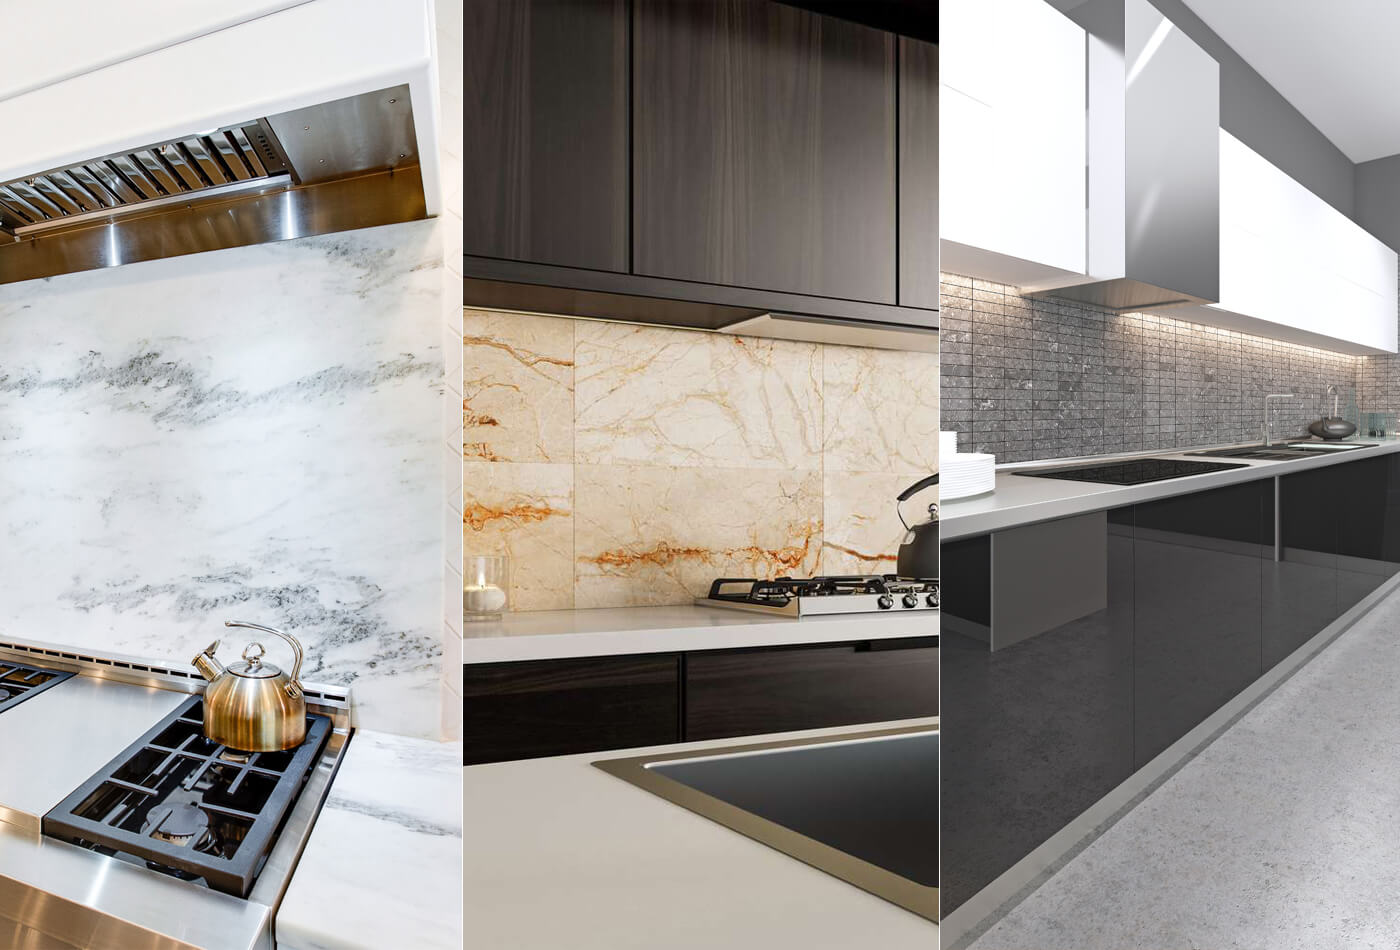 Different Colour Options FDo You Want To Know The Different Colour Options For Your Backsplashor Your Backsplash